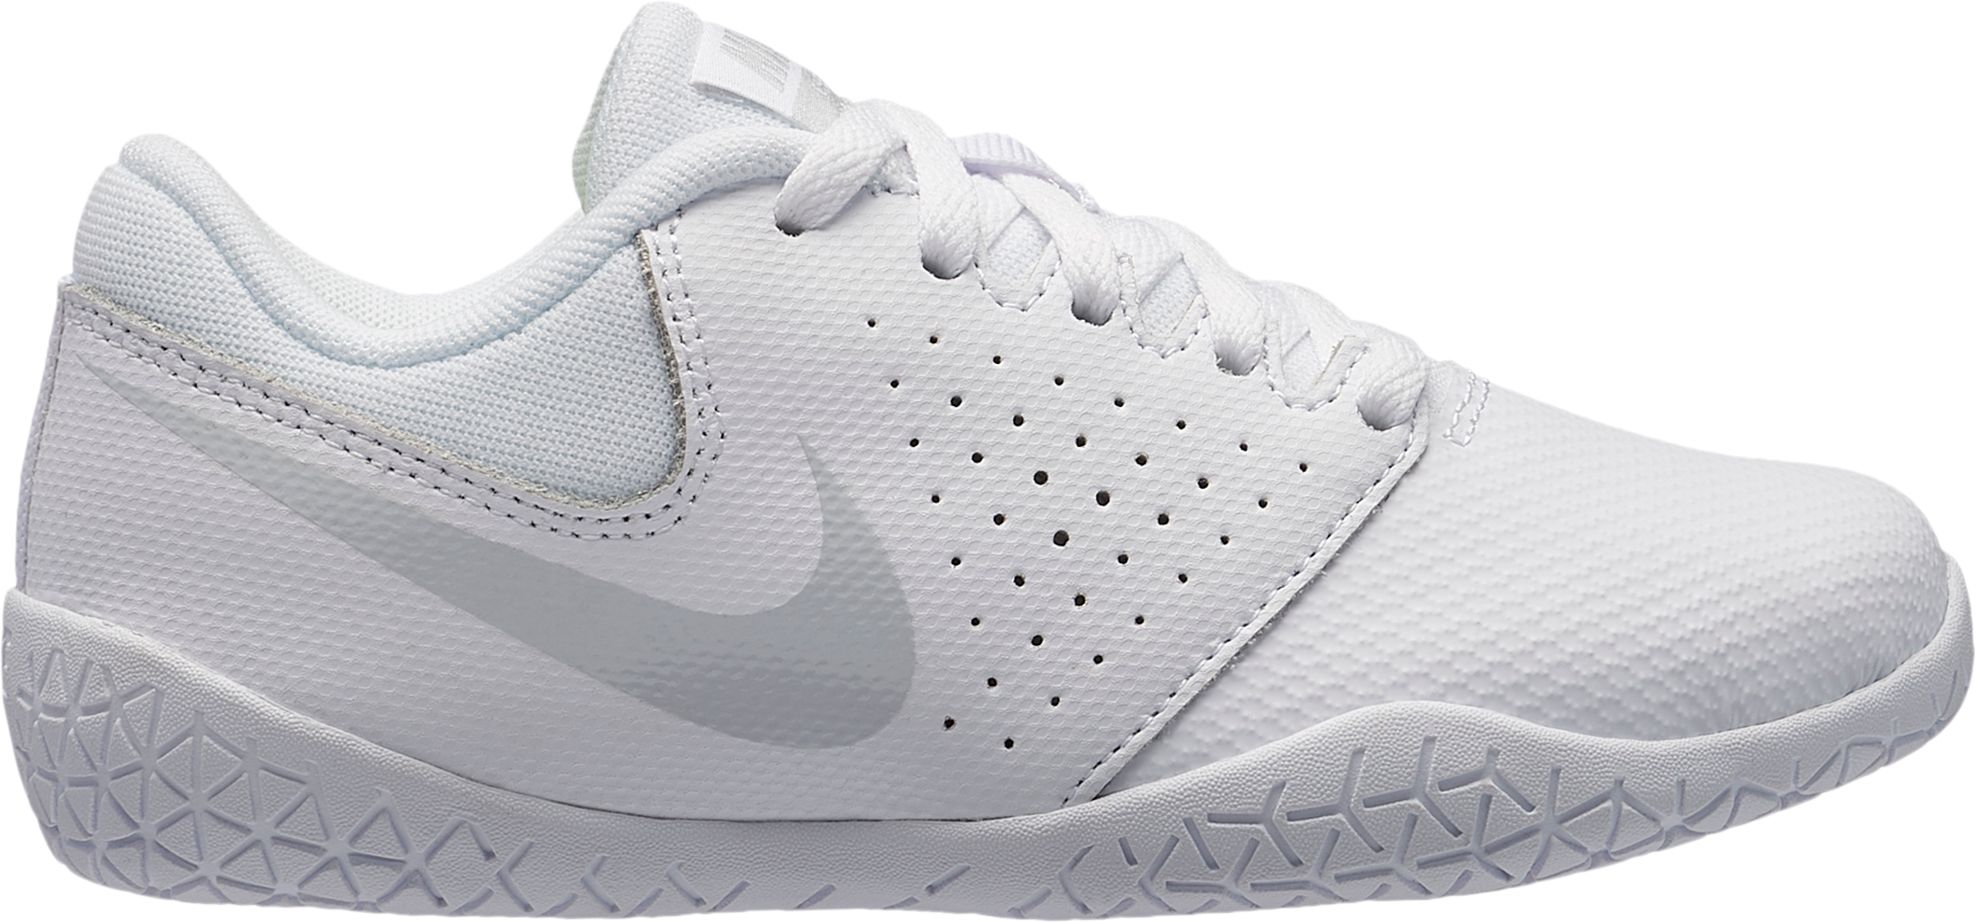 nike youth cheer shoes